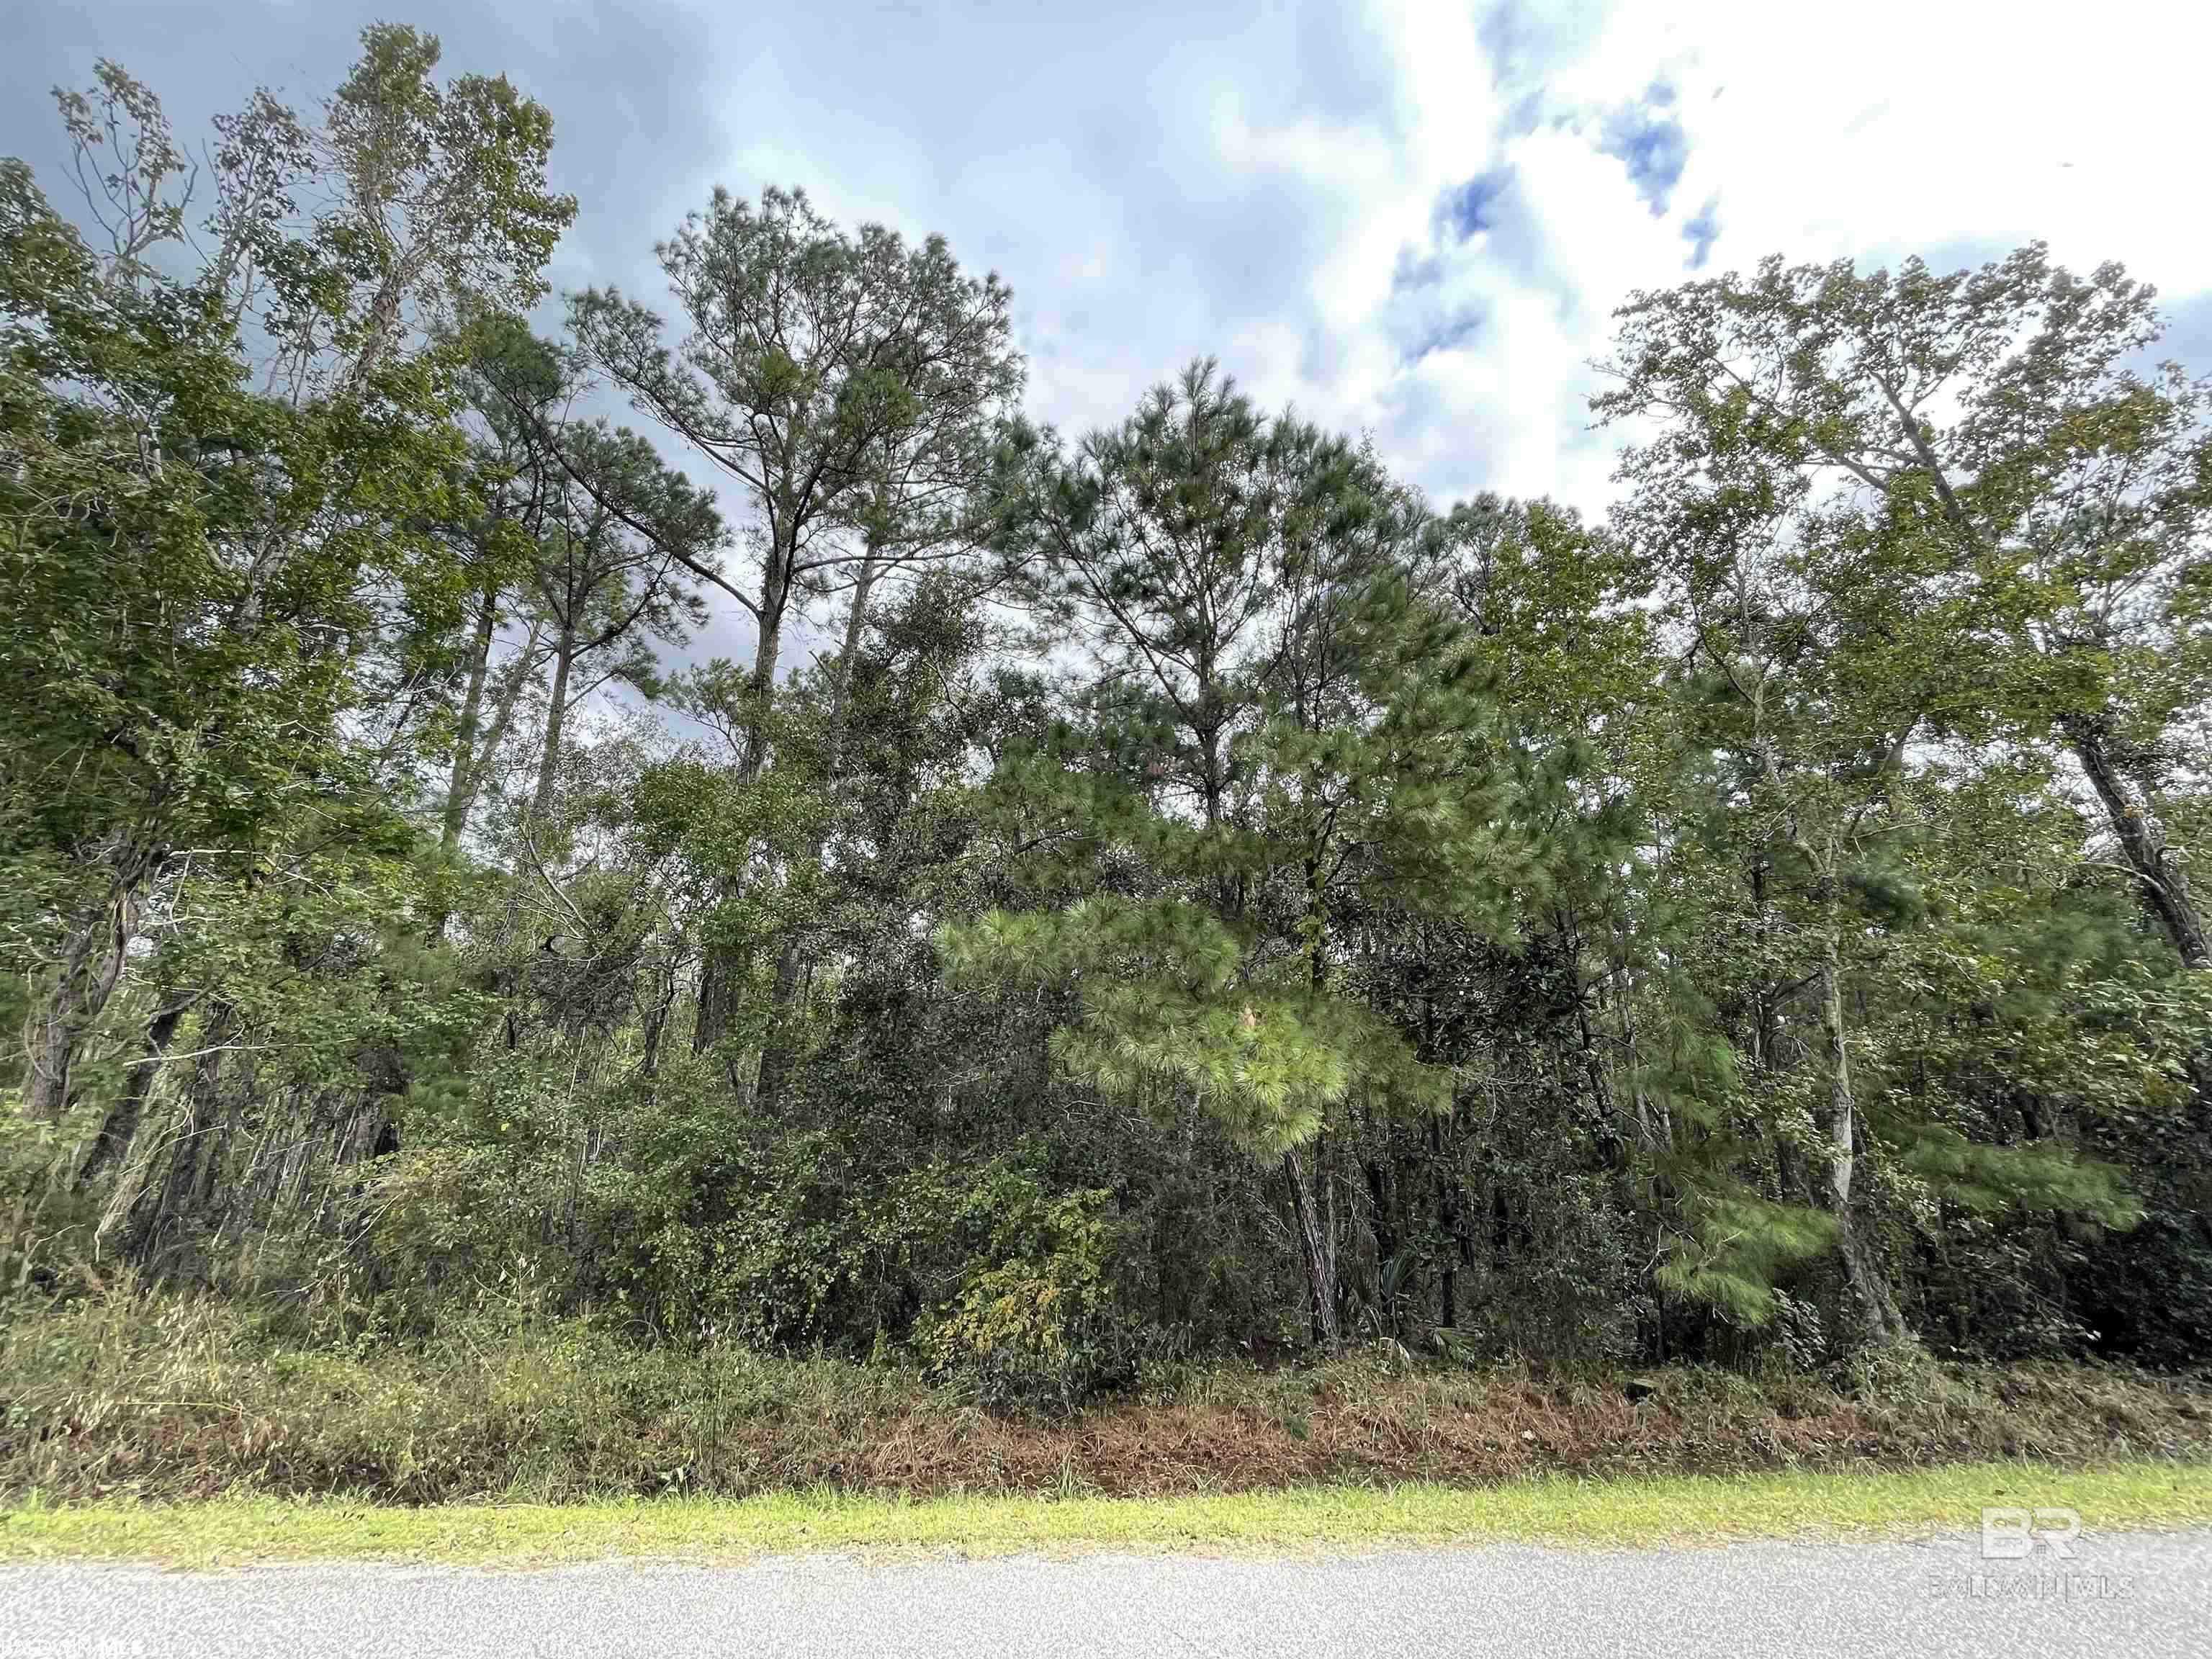 Want to build your dream home with deeded access to Mobile Bay? Look no further! These 2 undeveloped lots are waiting for you! Located close to the Community Boat ramp, these two lots have excellent potential to become the perfect home away from or dream residence. Along with the lots comes 1/59 per lot interest in the Boat Ramp and swimming lot. There is a security camera installed by the owners that they alternating monitoring. The best place to catch the sunset is steps away in the community common area. Please see MLS Listing number addional lots 82 and 83, and buy all four lots! This is Baldwin County best kept secret. Located at the end of the road these lots offer privacy and secluded serenity. Come check them out today!